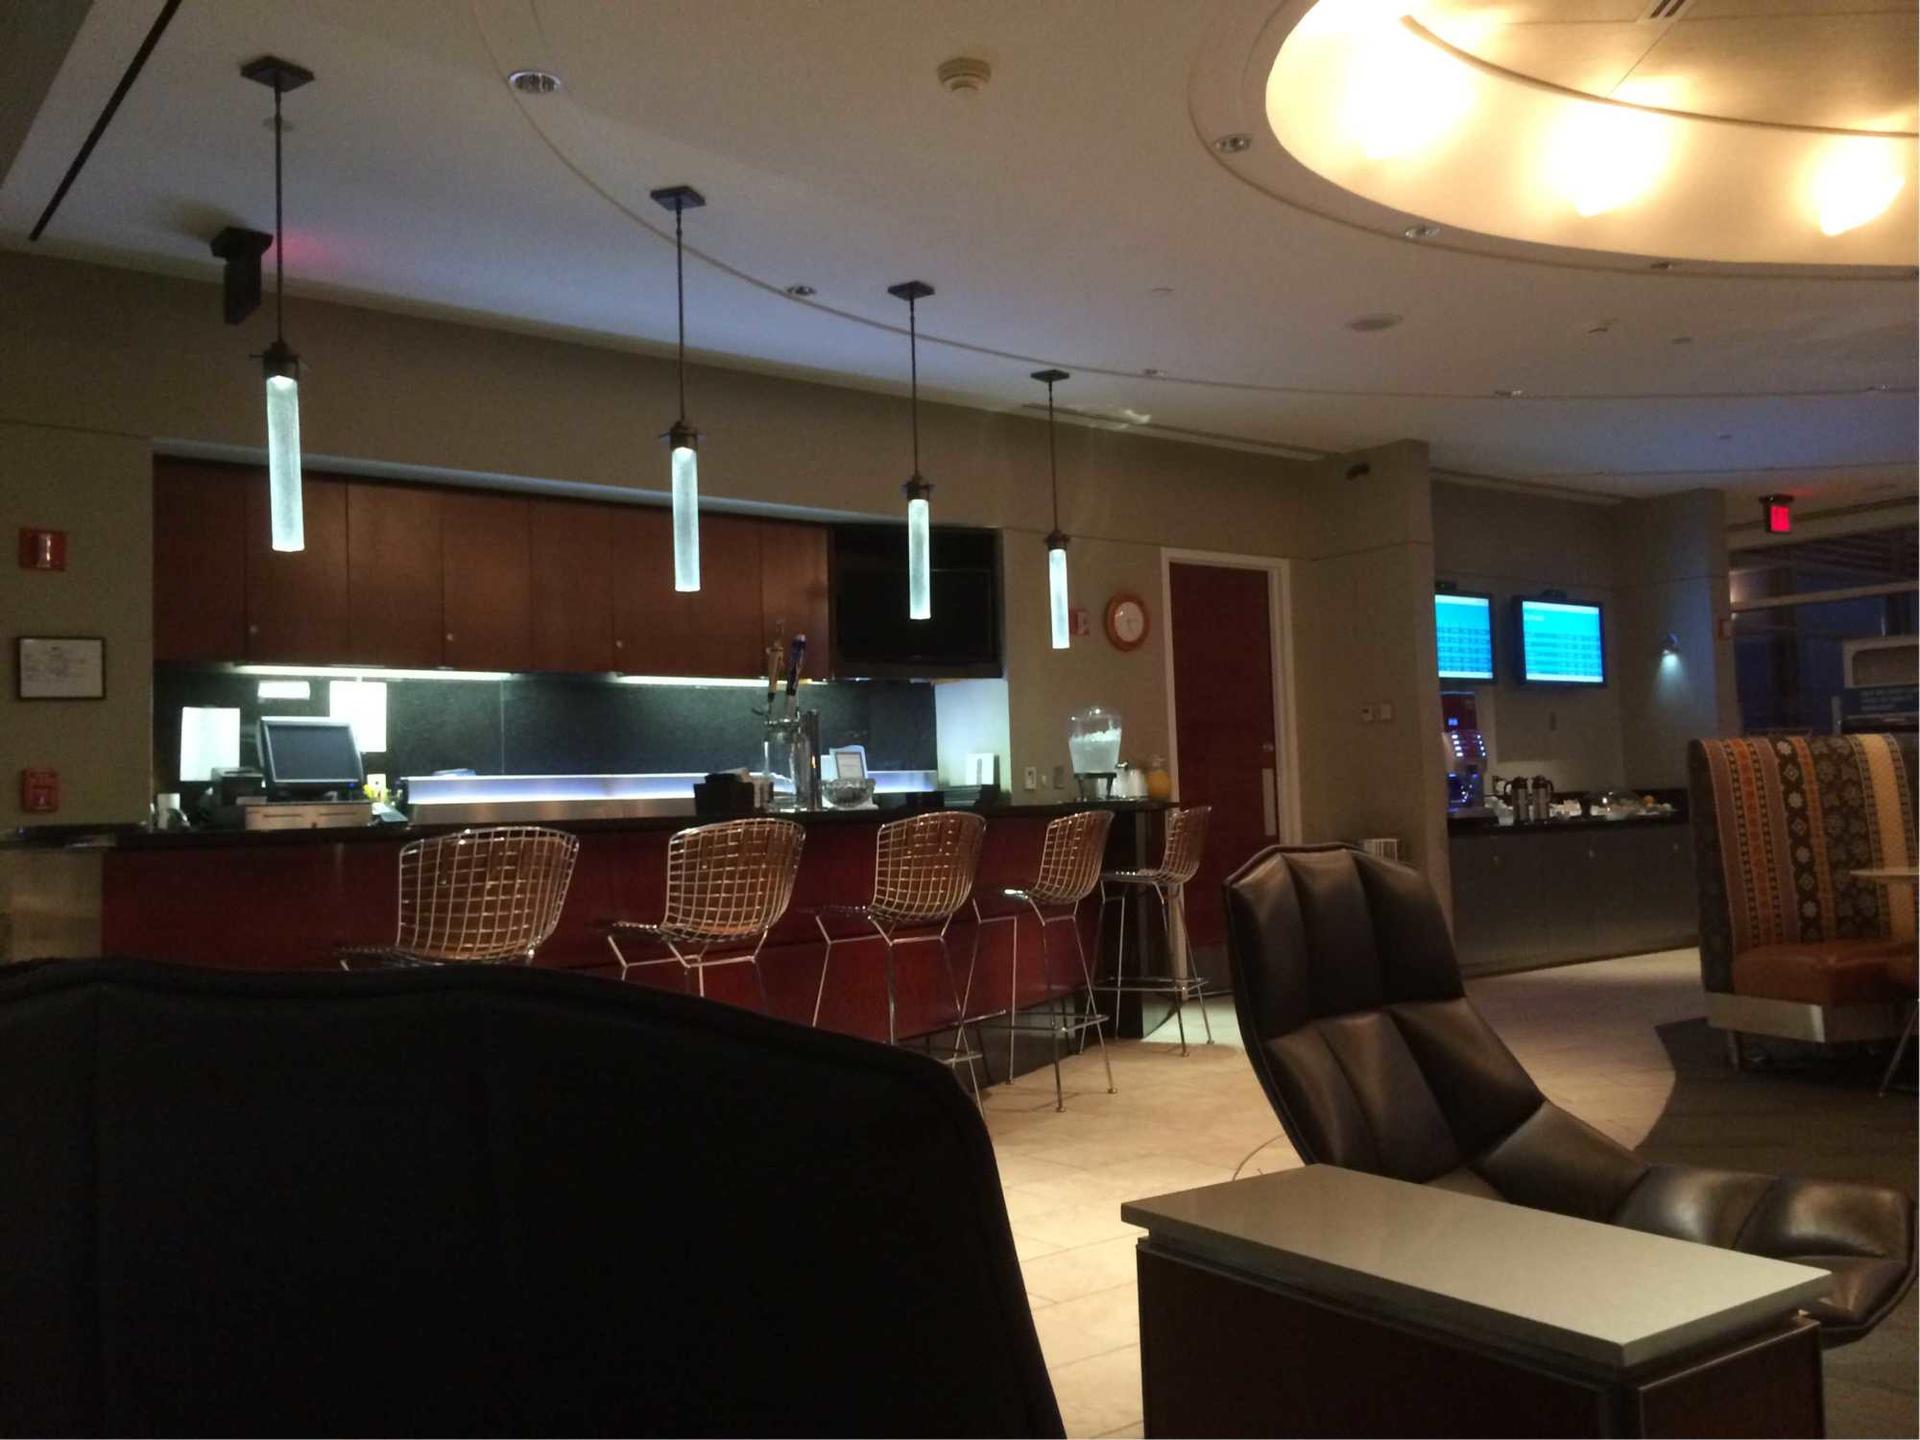 American Airlines Admirals Club image 1 of 22